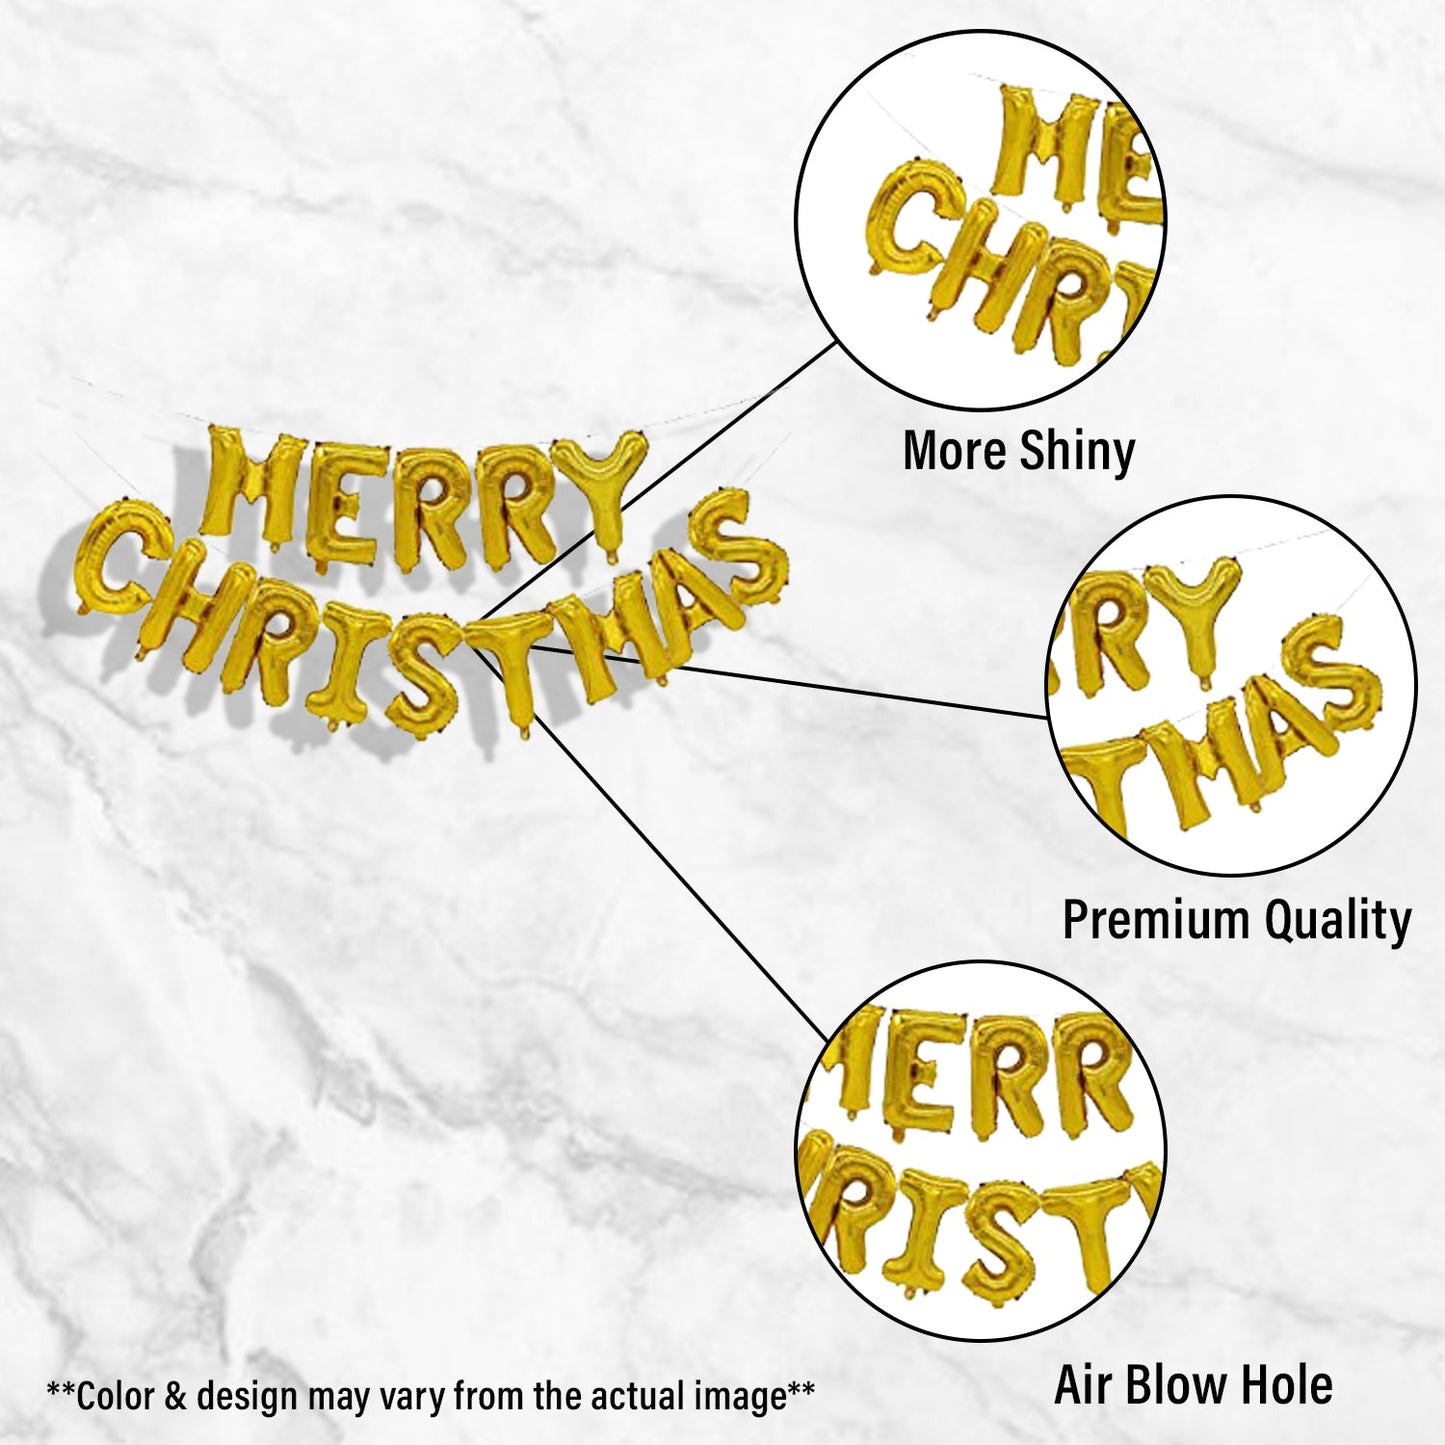 Merry Christmas Letter Foil Balloon-1 Set of 14 Pcs- 16 Inch- Golden Color freeshipping - CherishX Partystore